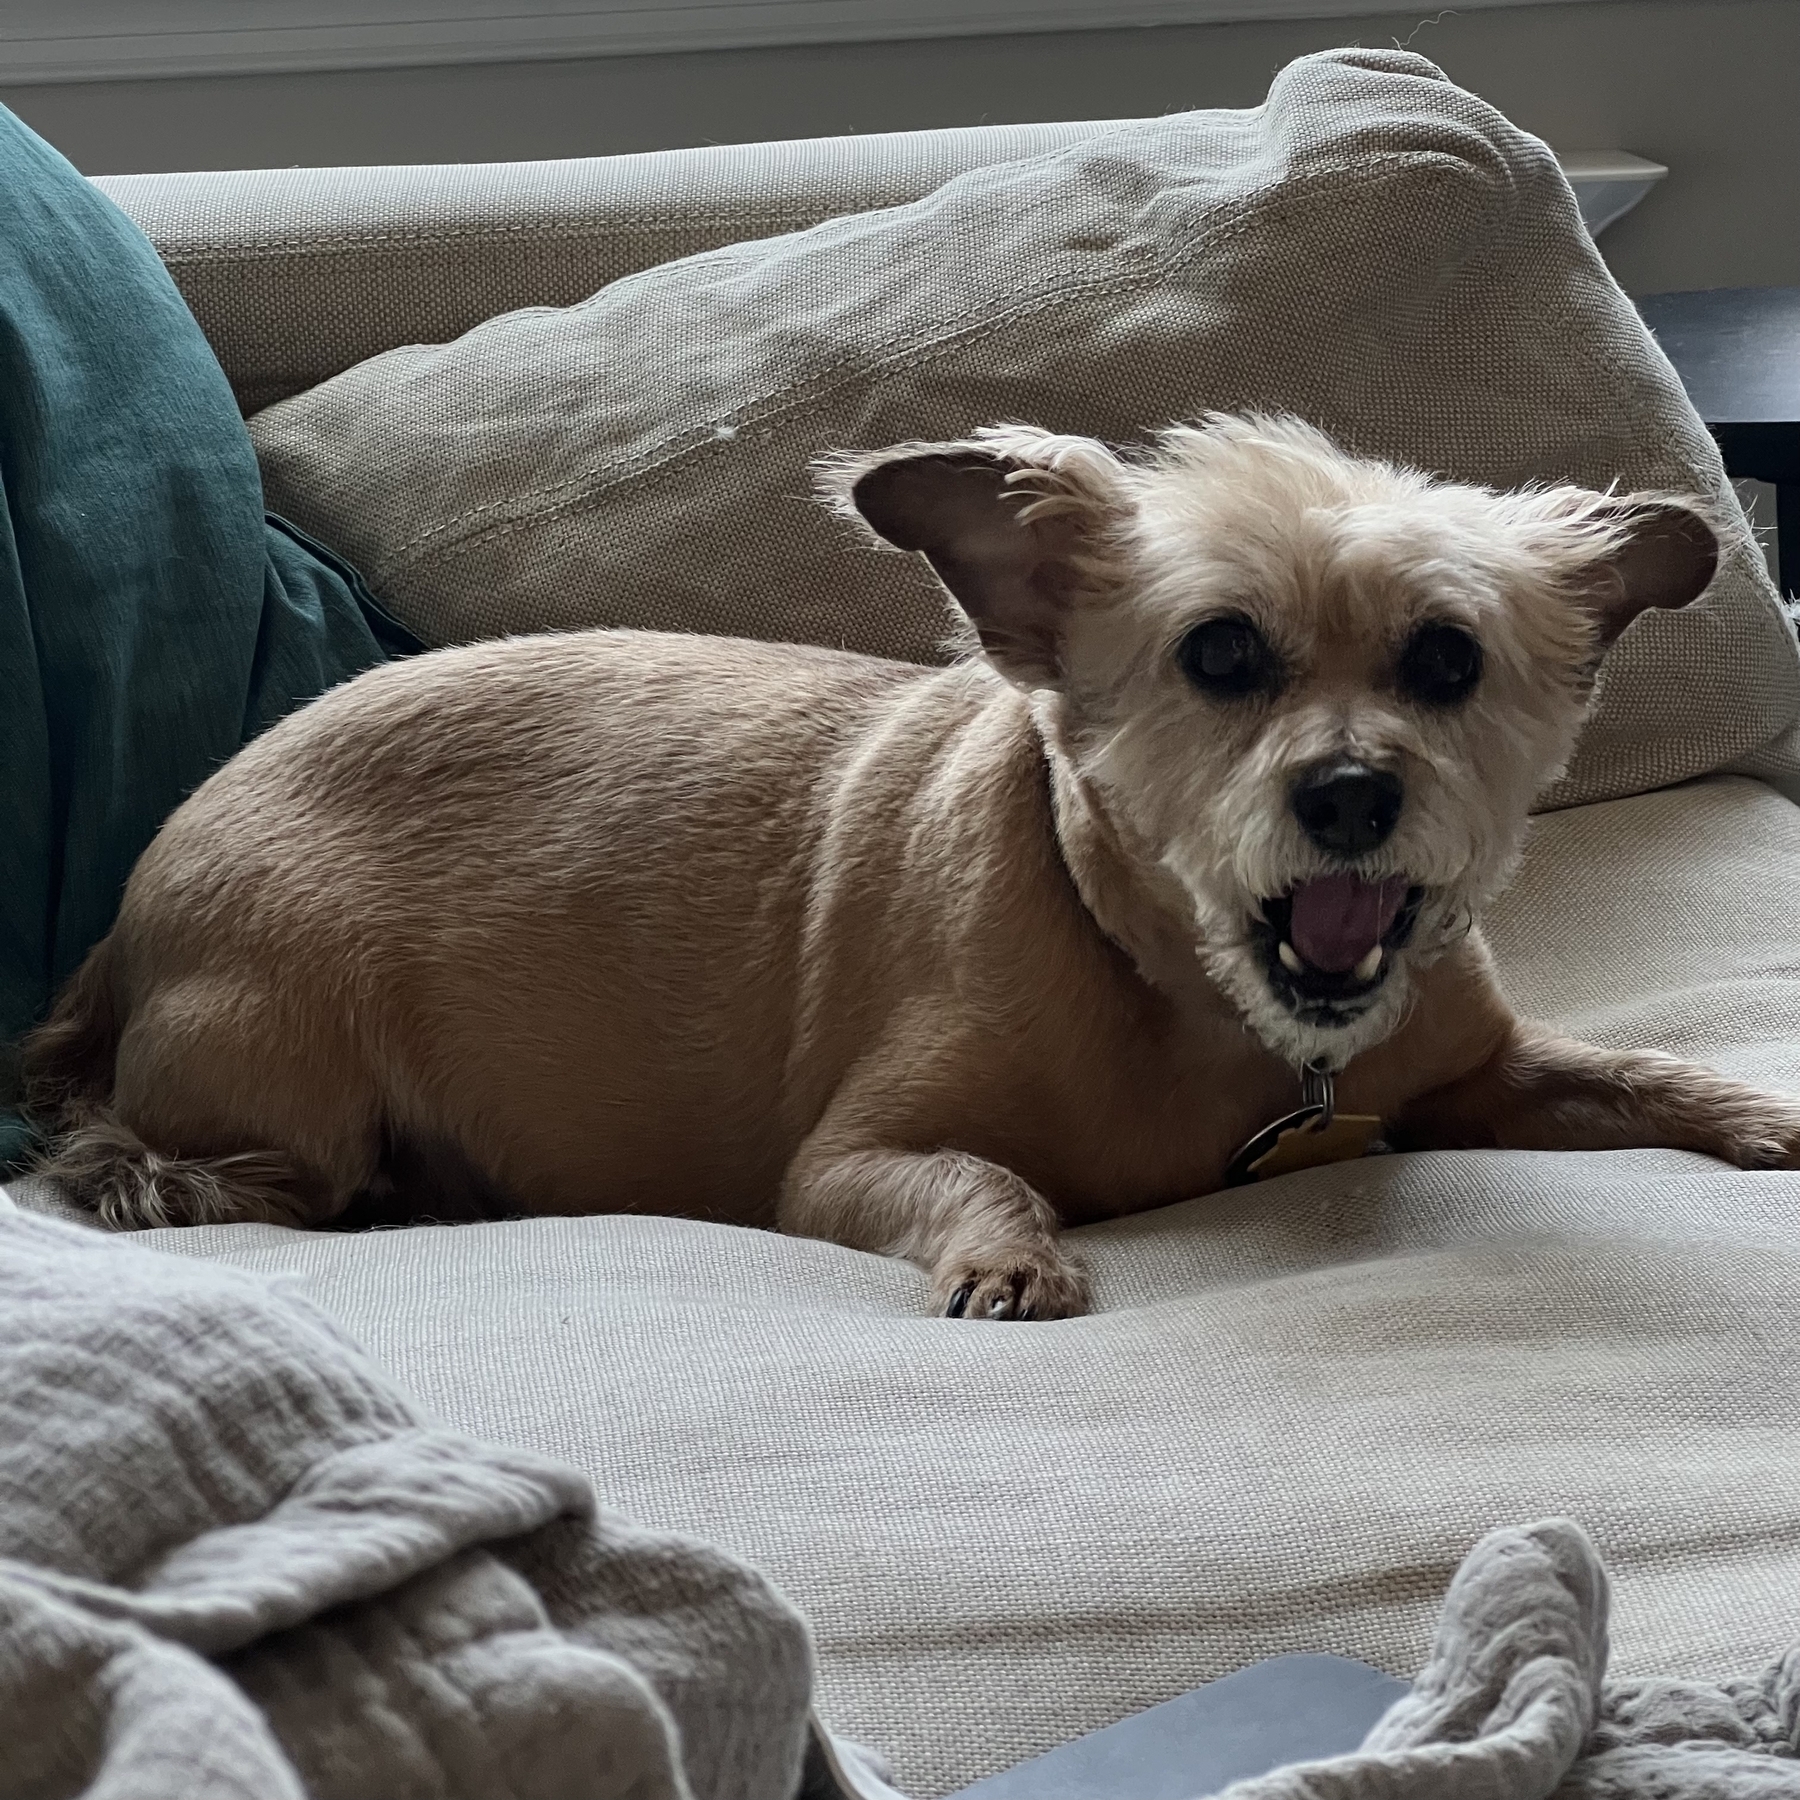 My dog Brandy, a brown Cairn terrier who as recently buzzed, with her mouth wide showing only her canine teeth while on the couch.